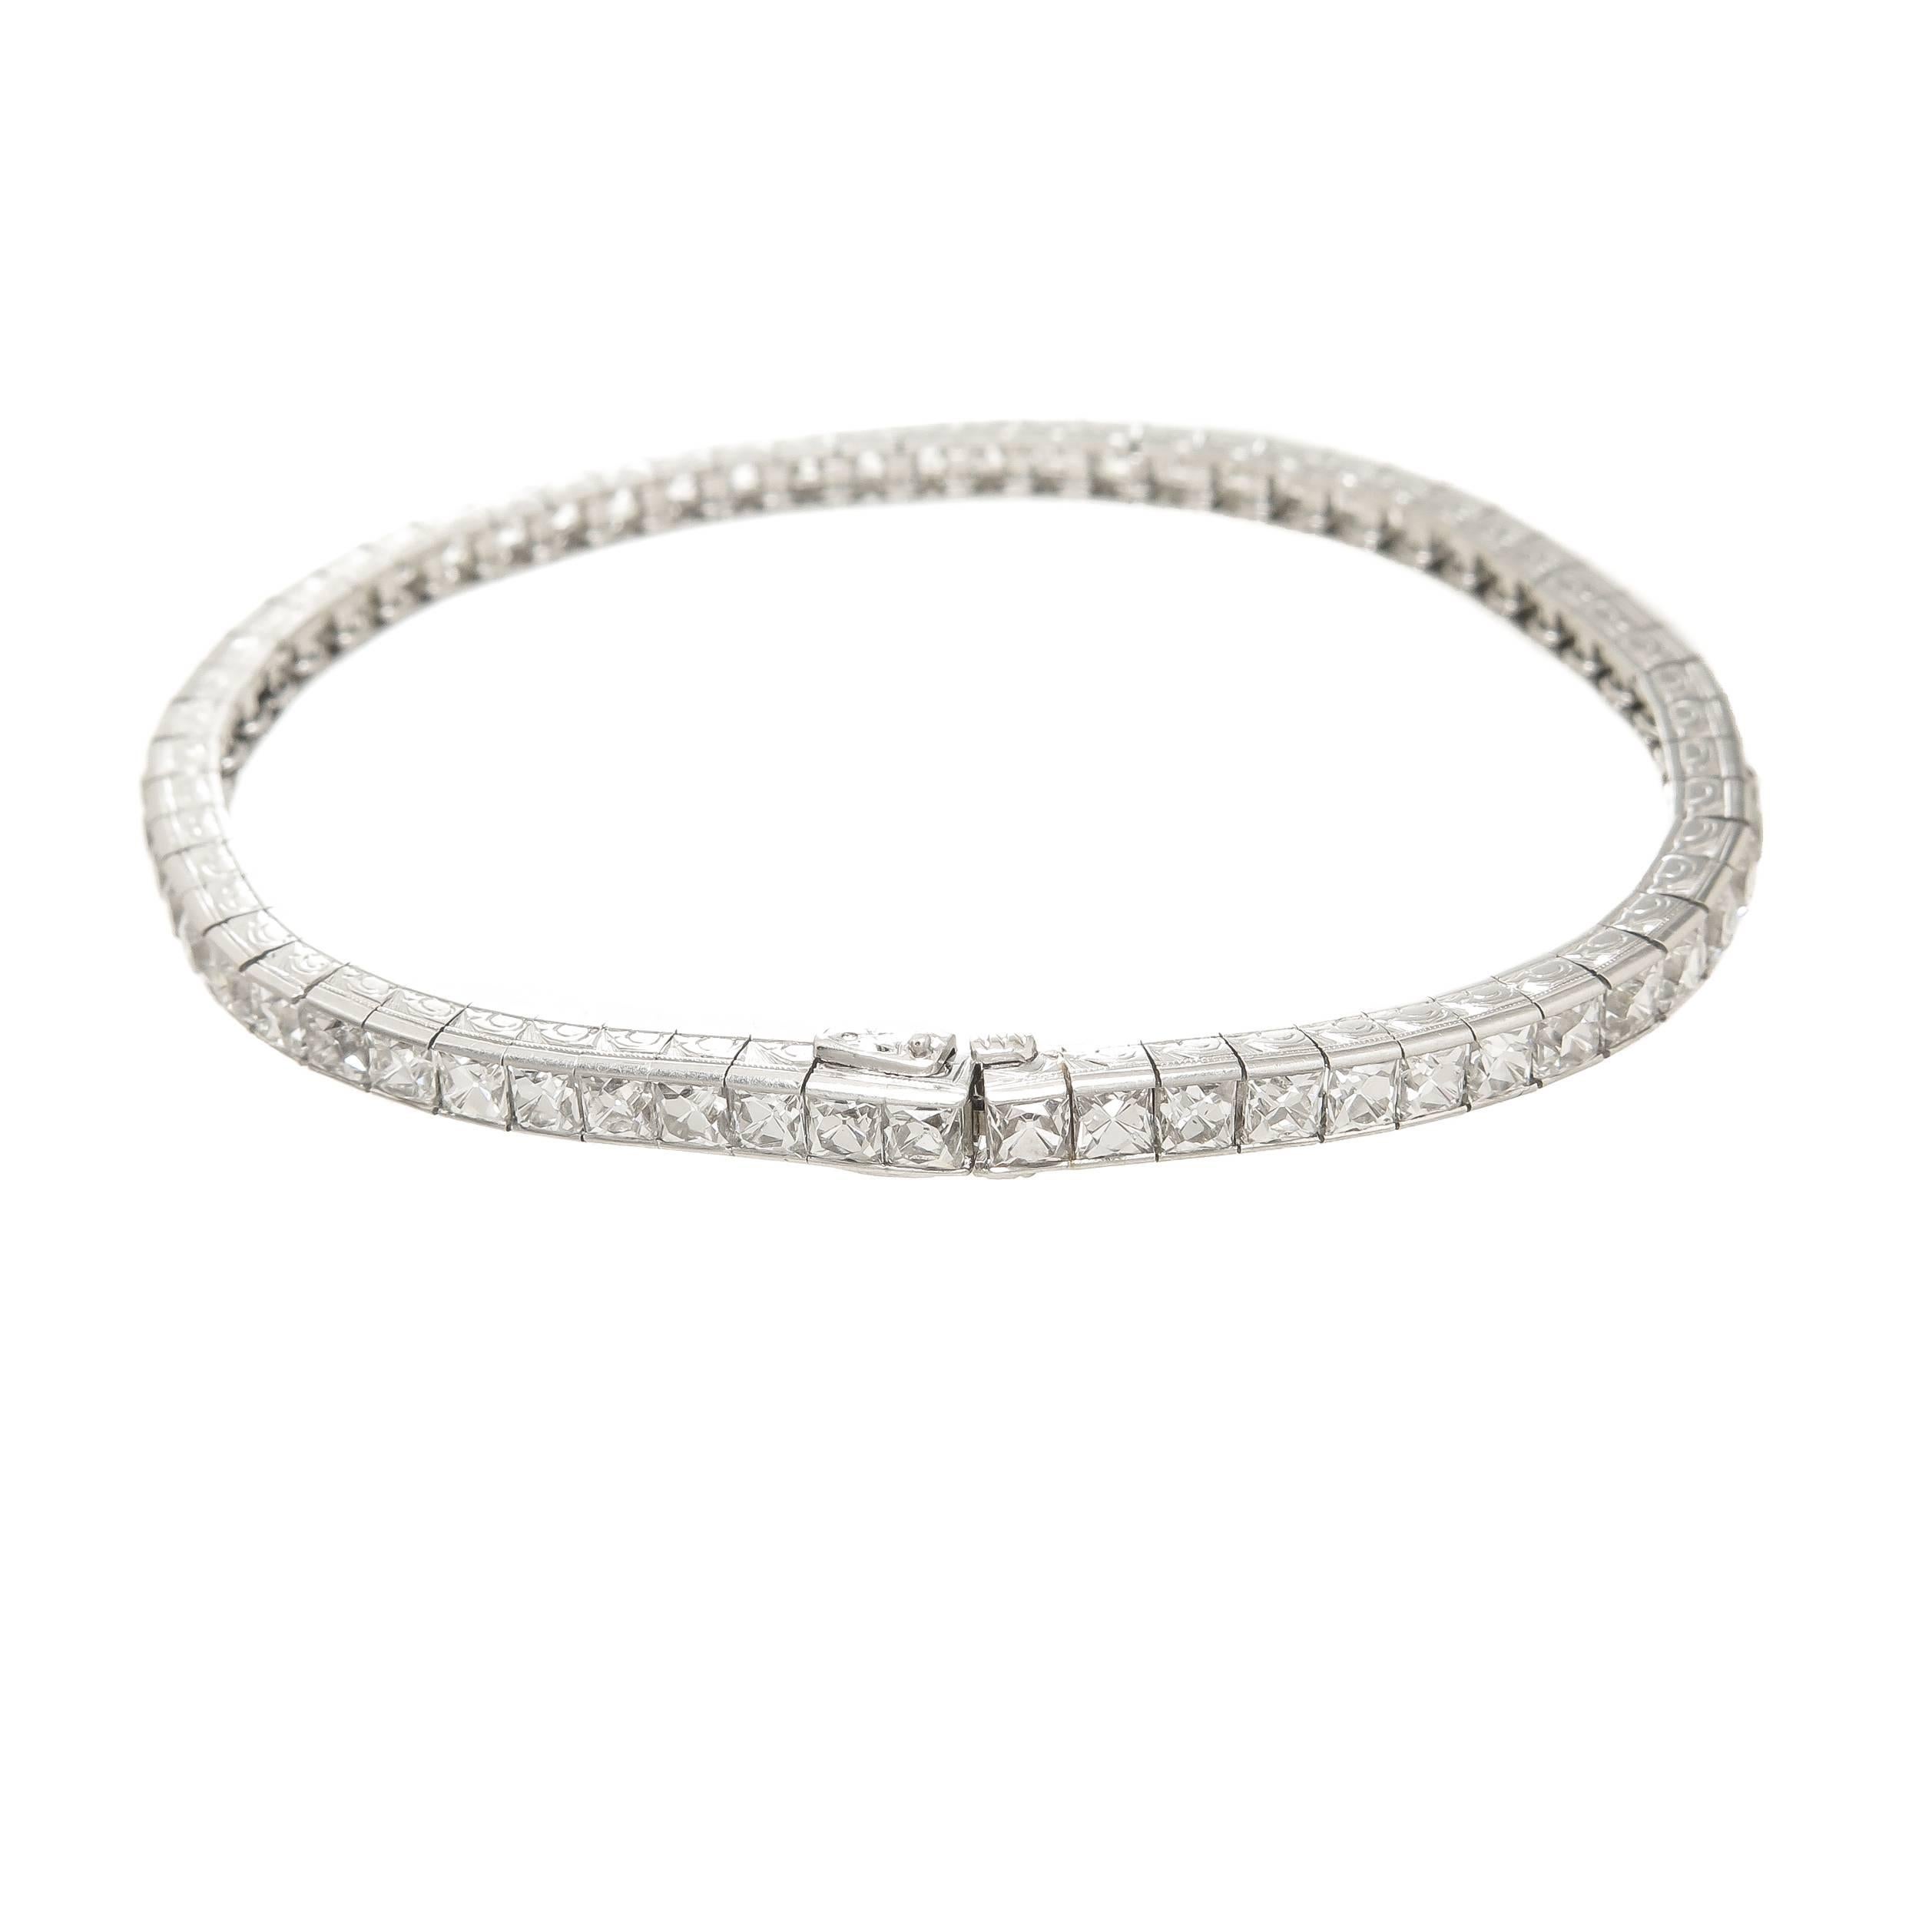 Circa 1920s very scarce to find Platinum line Bracelet with larger French cut Diamonds, this numbered Bracelet measures 7 1/4 inches in length and 3.5 M.M. wide. Set with 62 finely match French Cuts grading each as H in Color and VS to SI in clarity